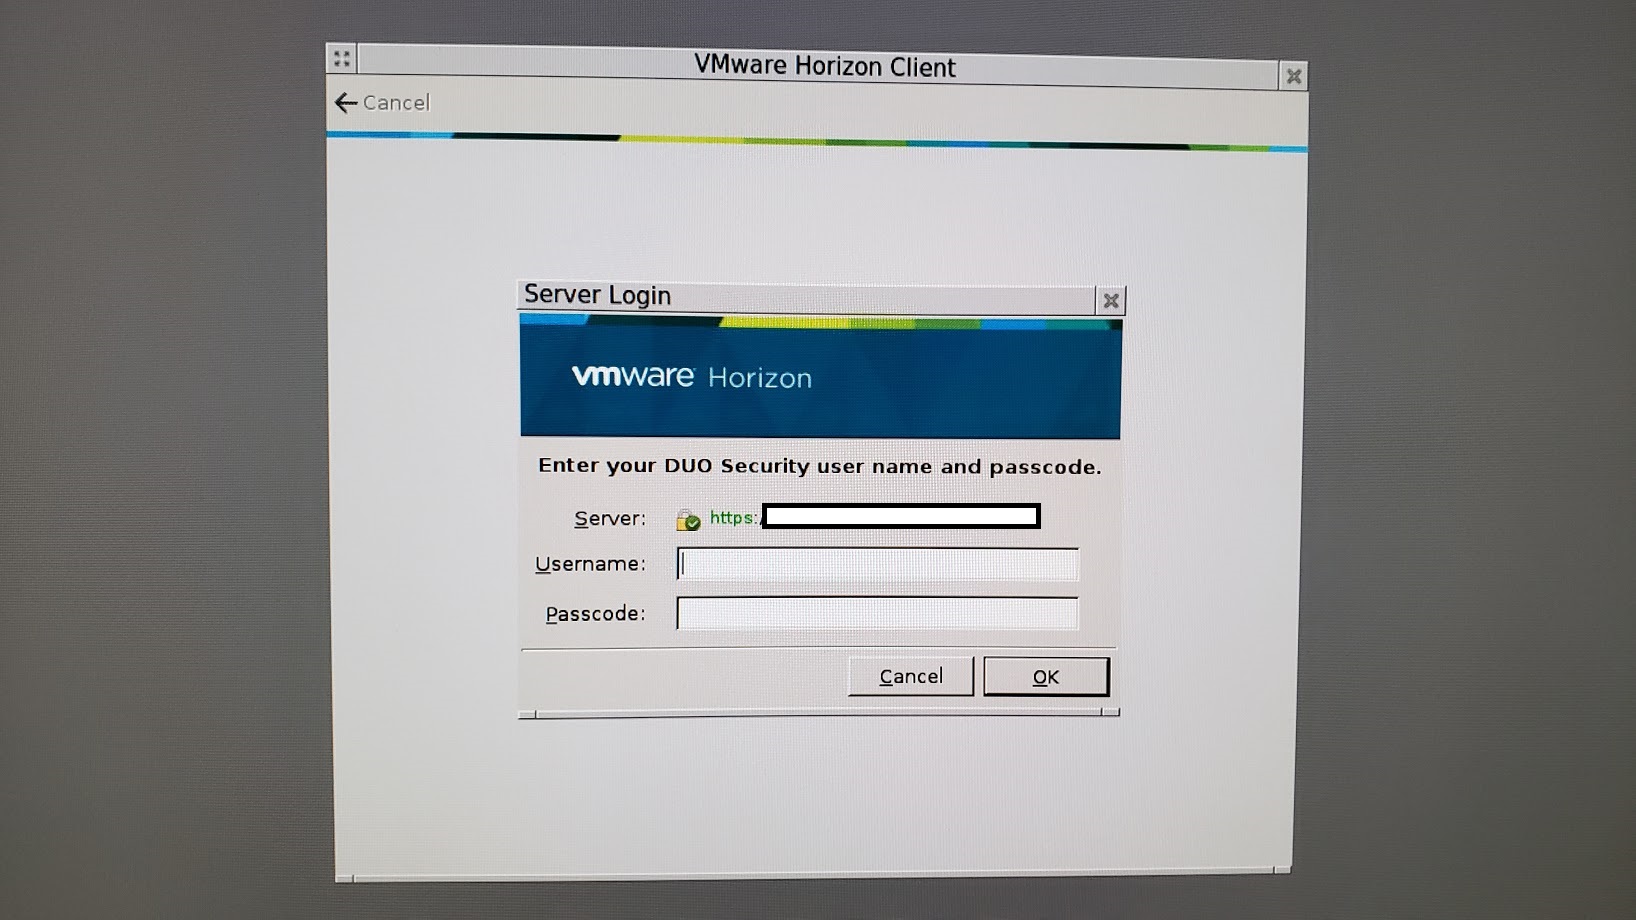 DUO Security Login VMware View Client Dialog Box